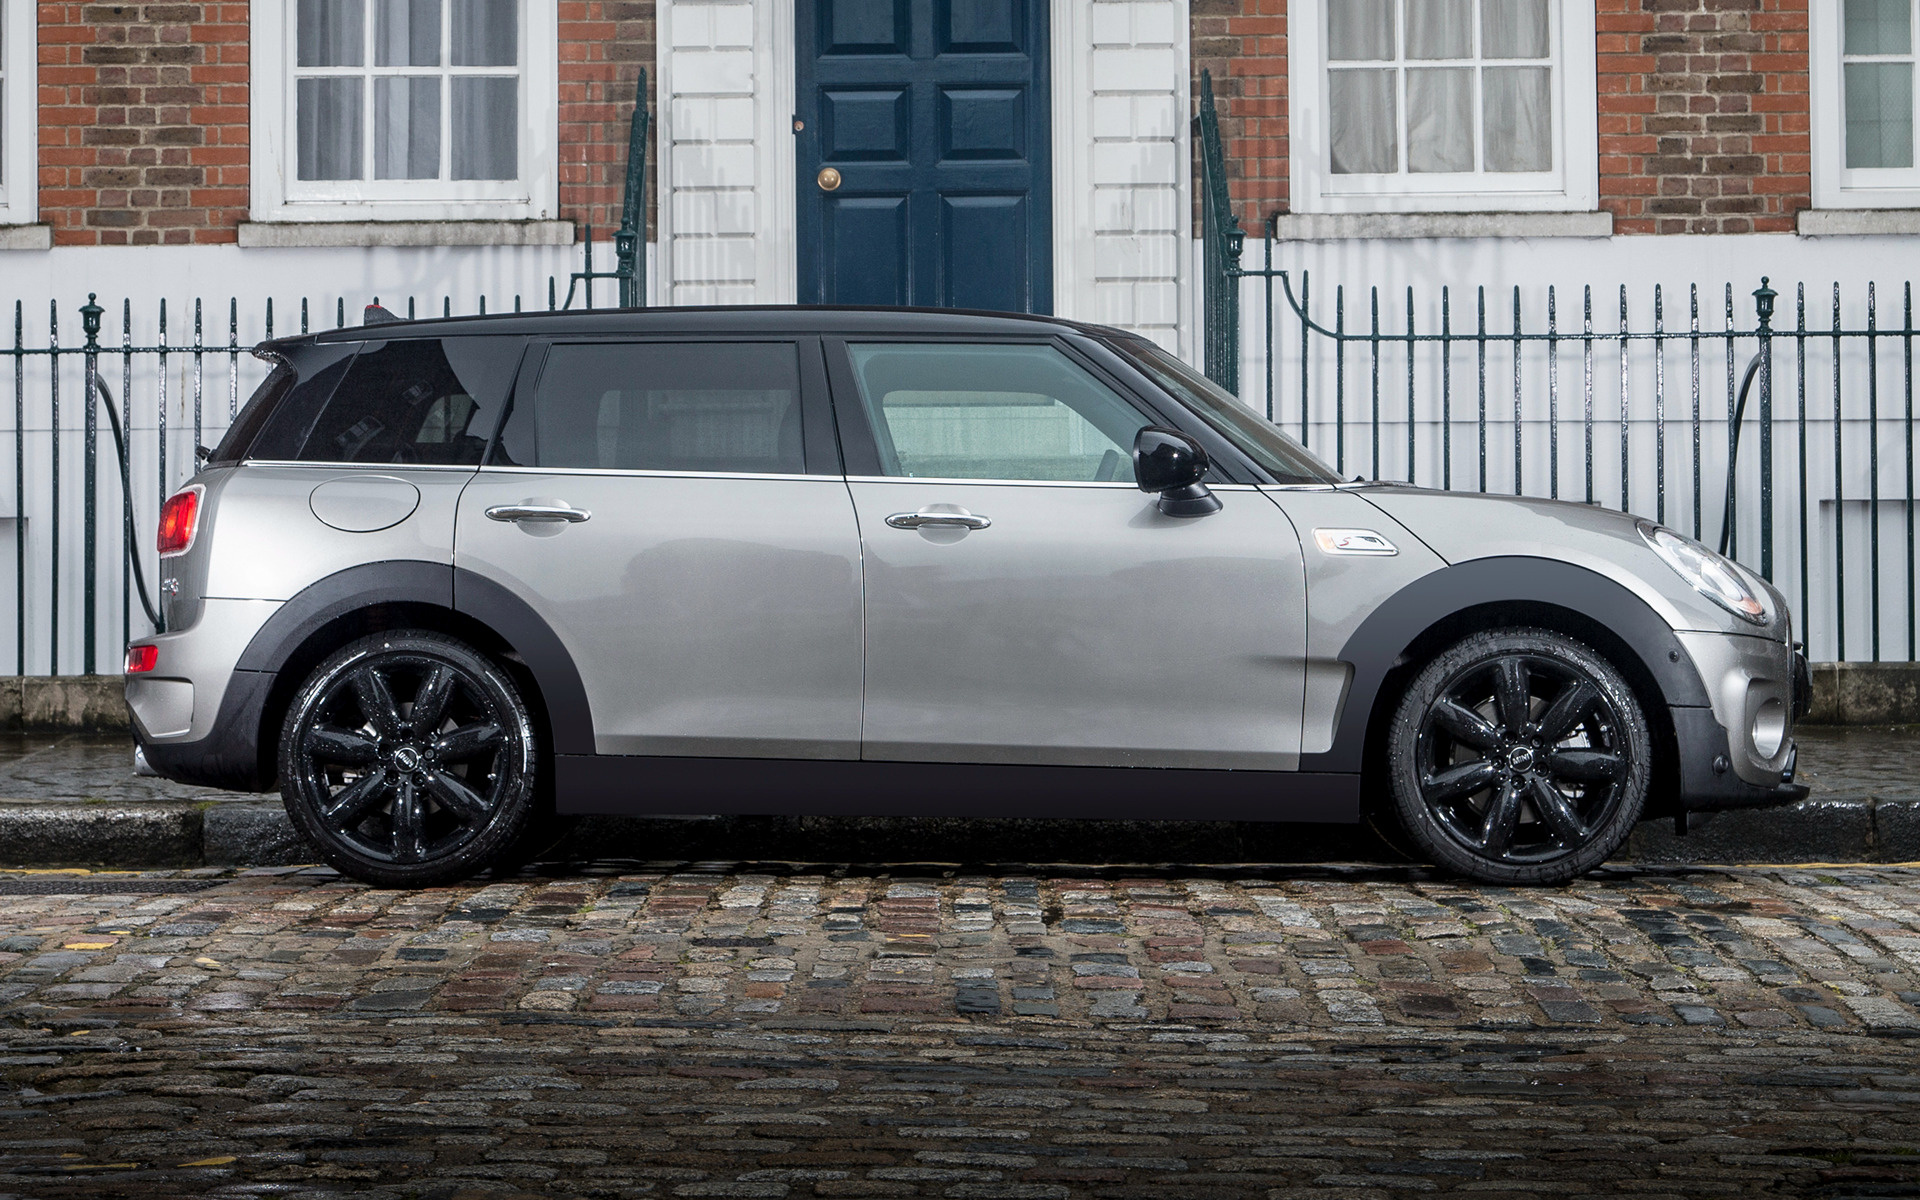 2015 Mini Cooper S Clubman (UK) - Wallpapers and HD Images | Car Pixel